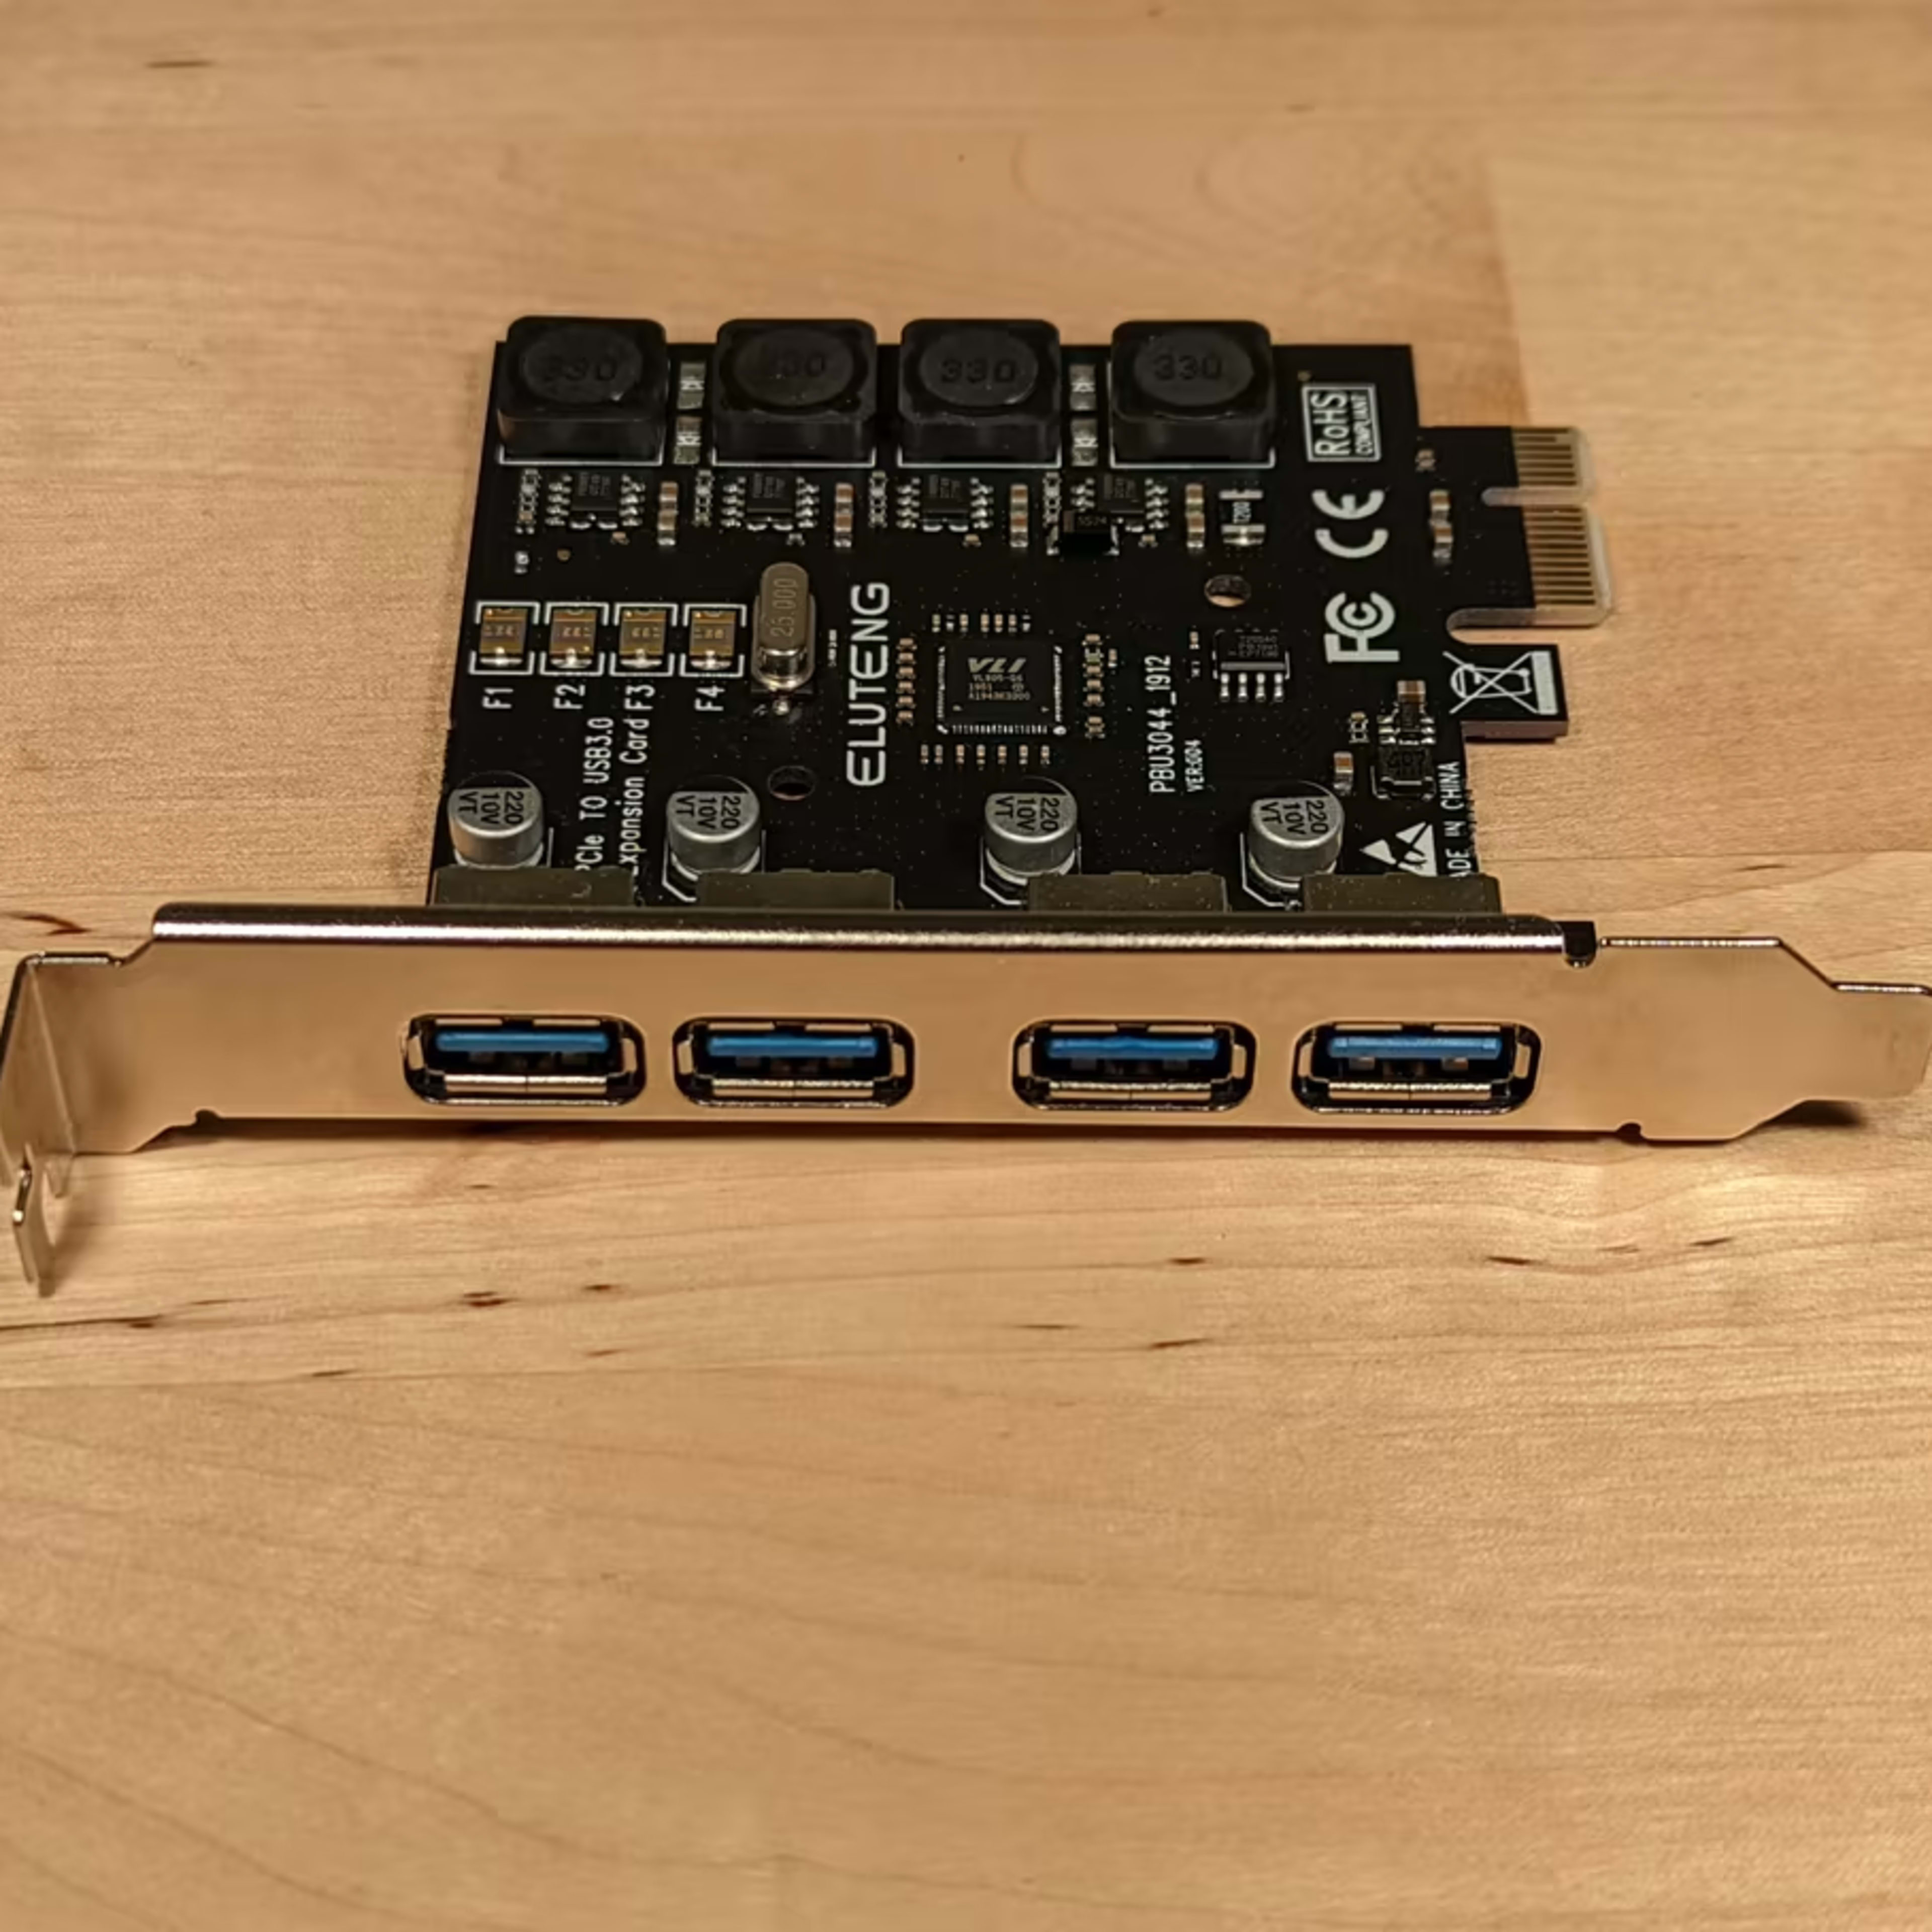 ELUTENG PCIe USB 3.0 Expansion Card | 5Gbps | 4 Ports 